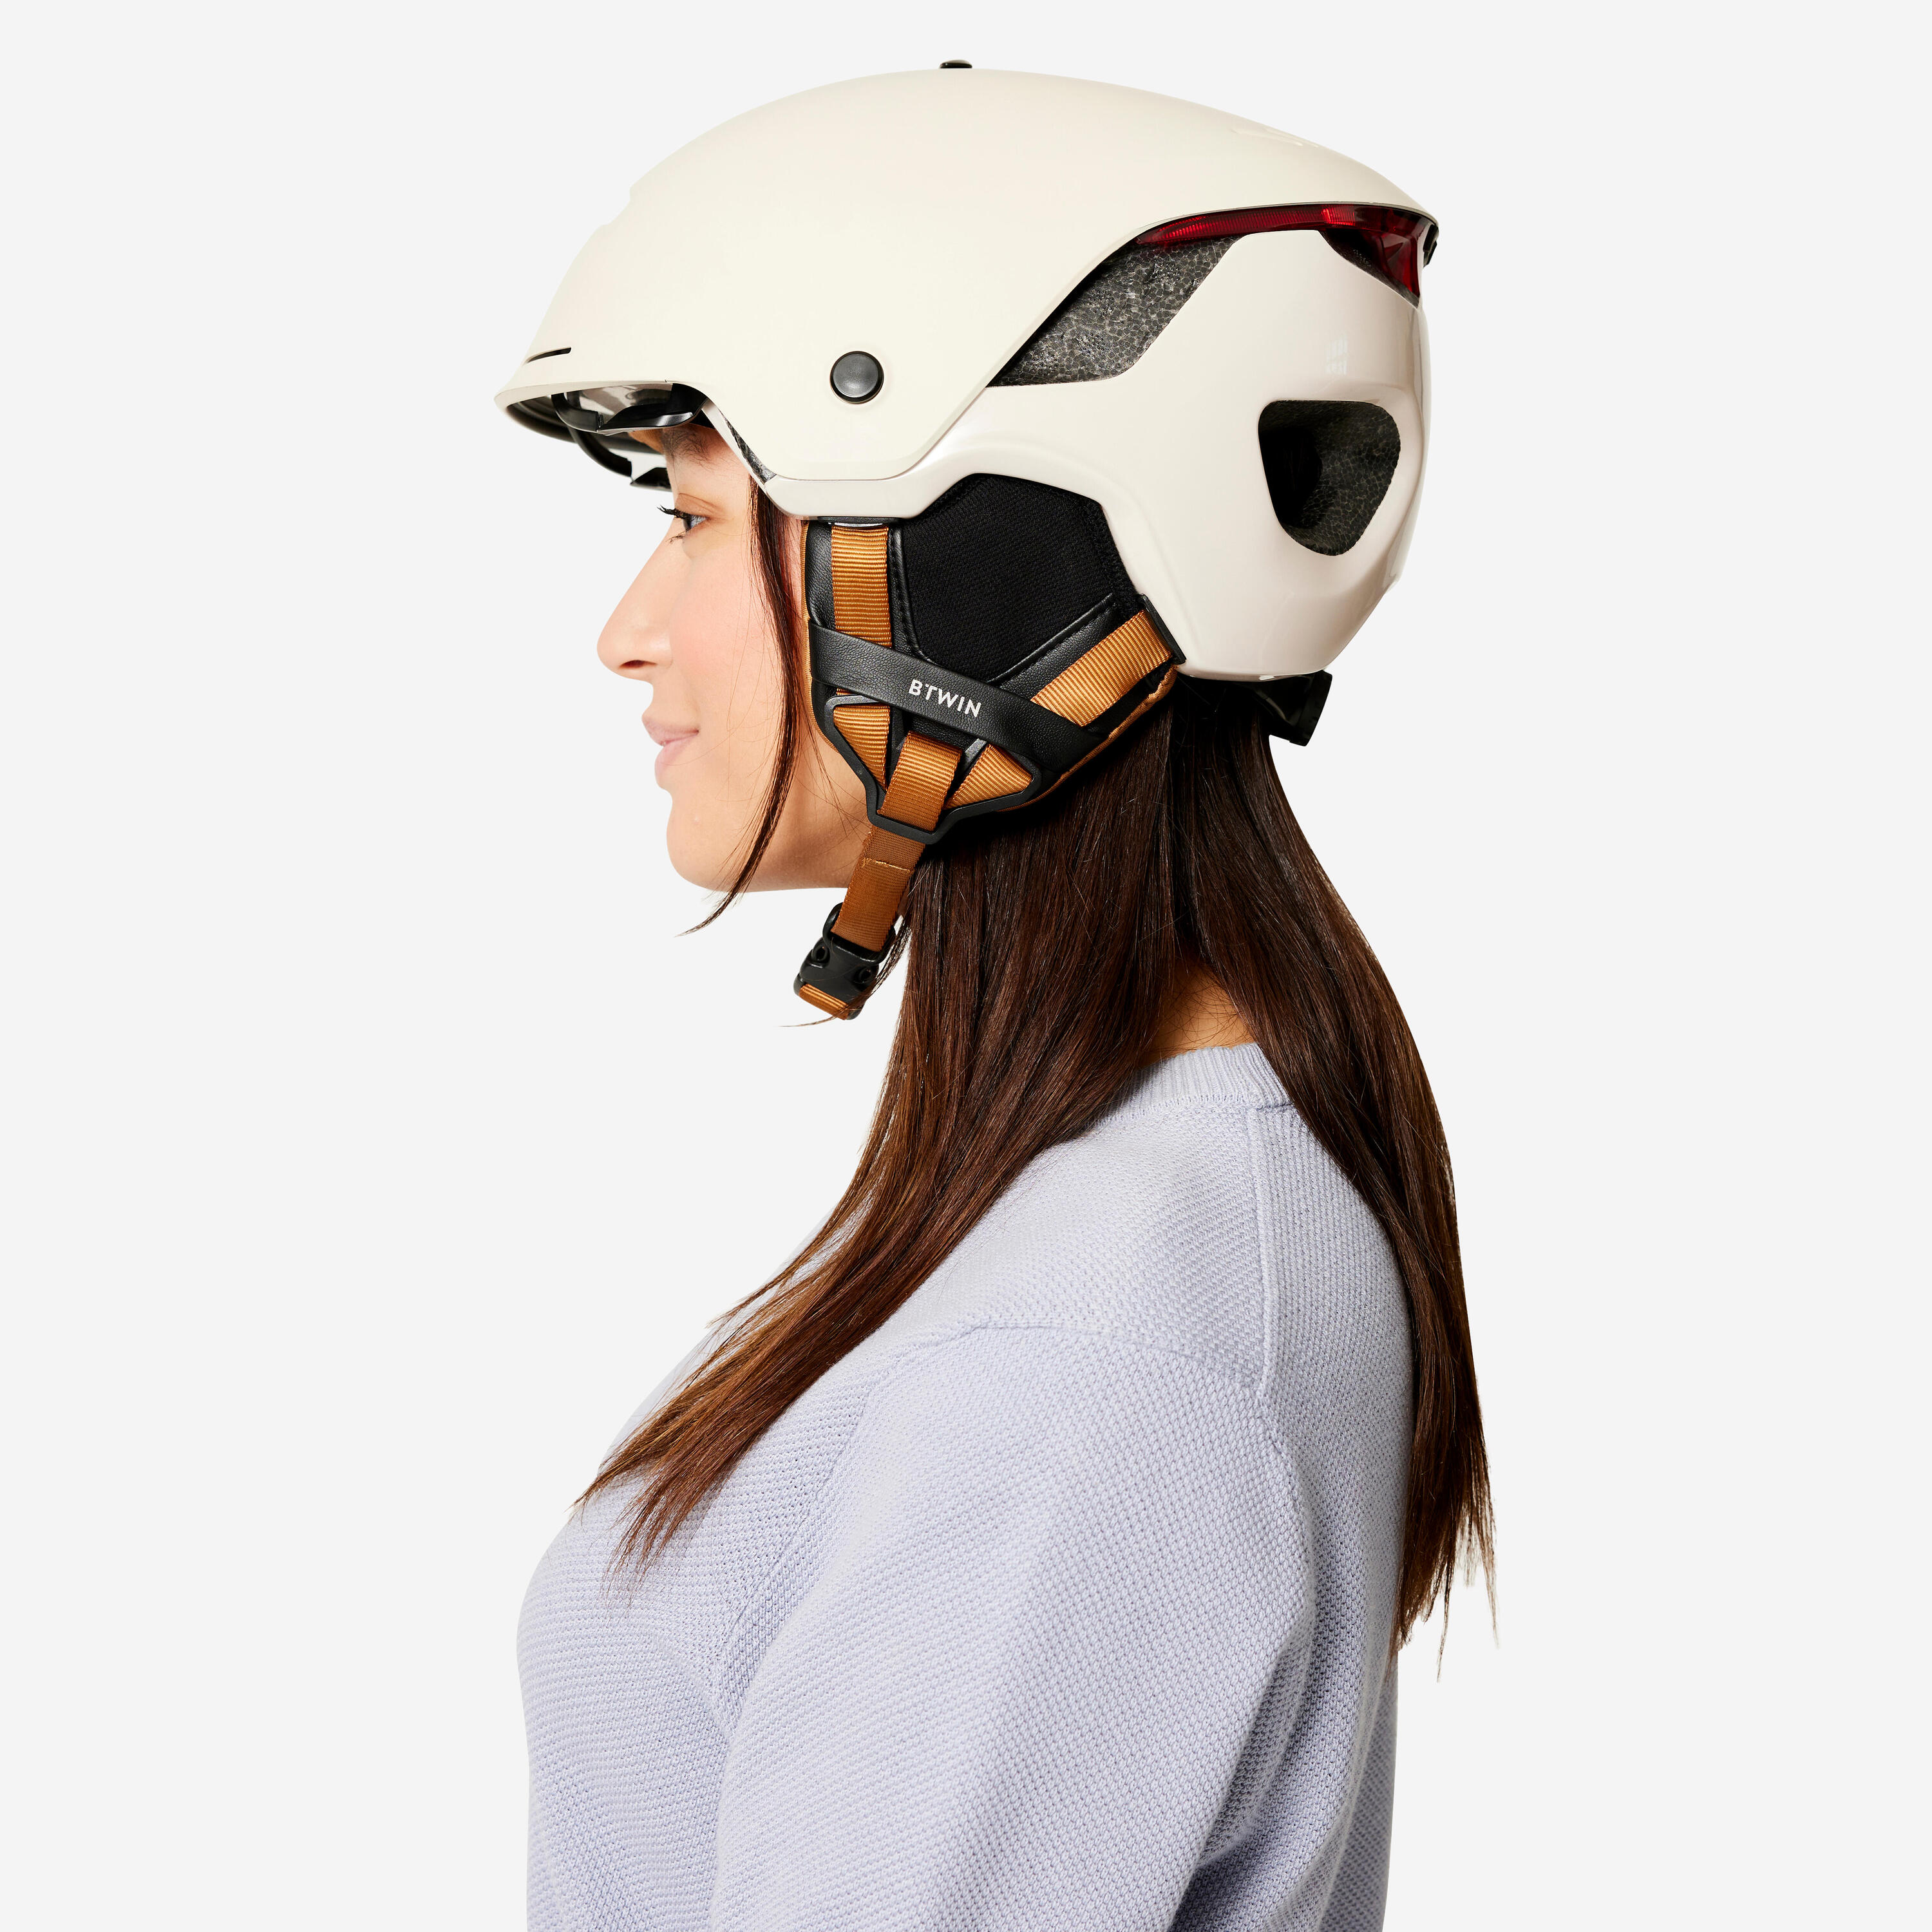 City Cycling Helmet with Visor and Rear Light 900 - Beige 9/11